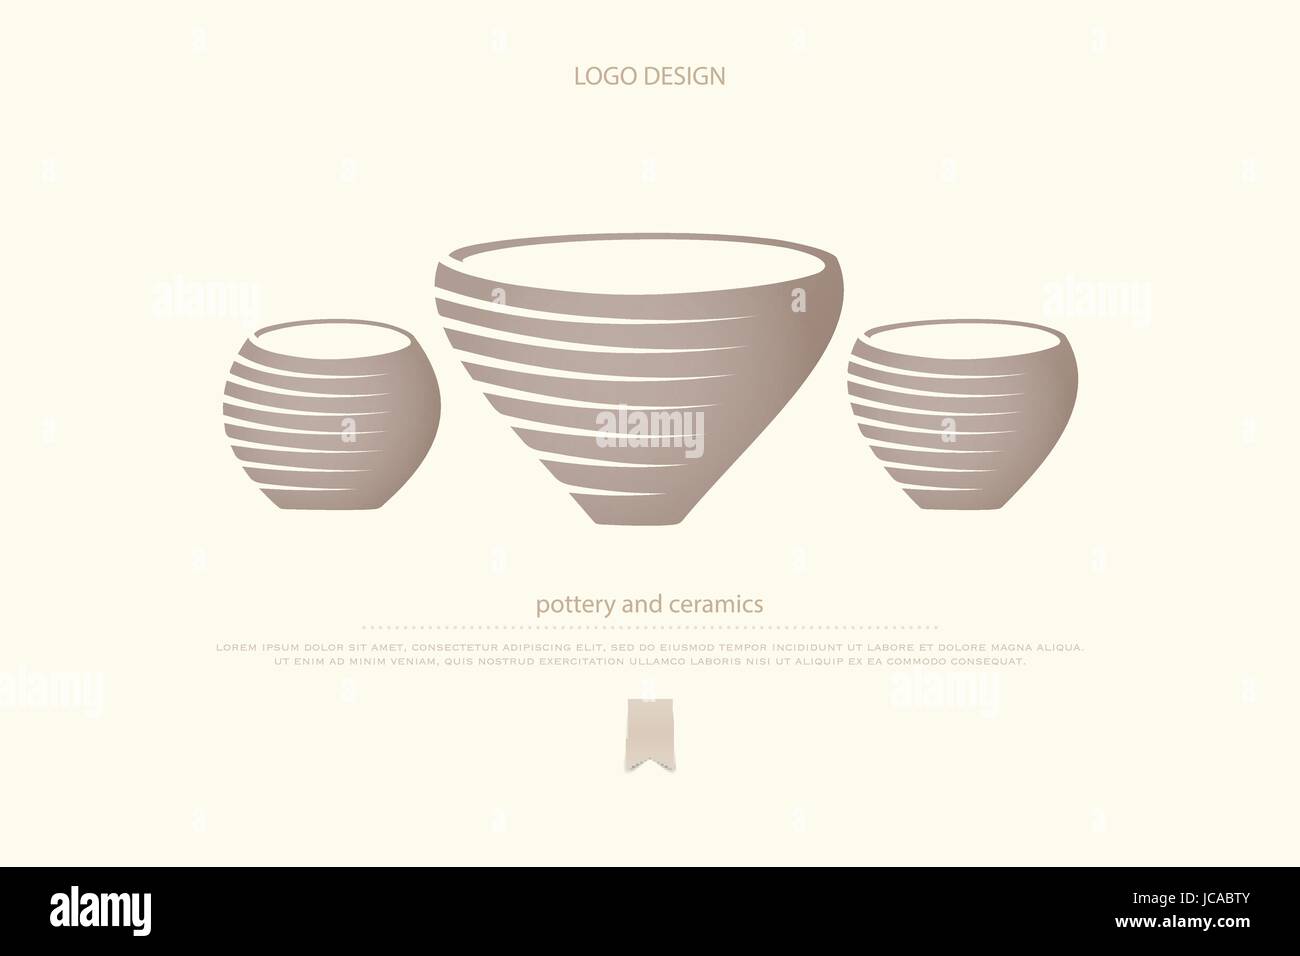 pot or clay vase icons. pottery and ceramics vector logo design. handiwork shop brand symbol. traditional handmade pots, classic art objects. archeolo Stock Vector